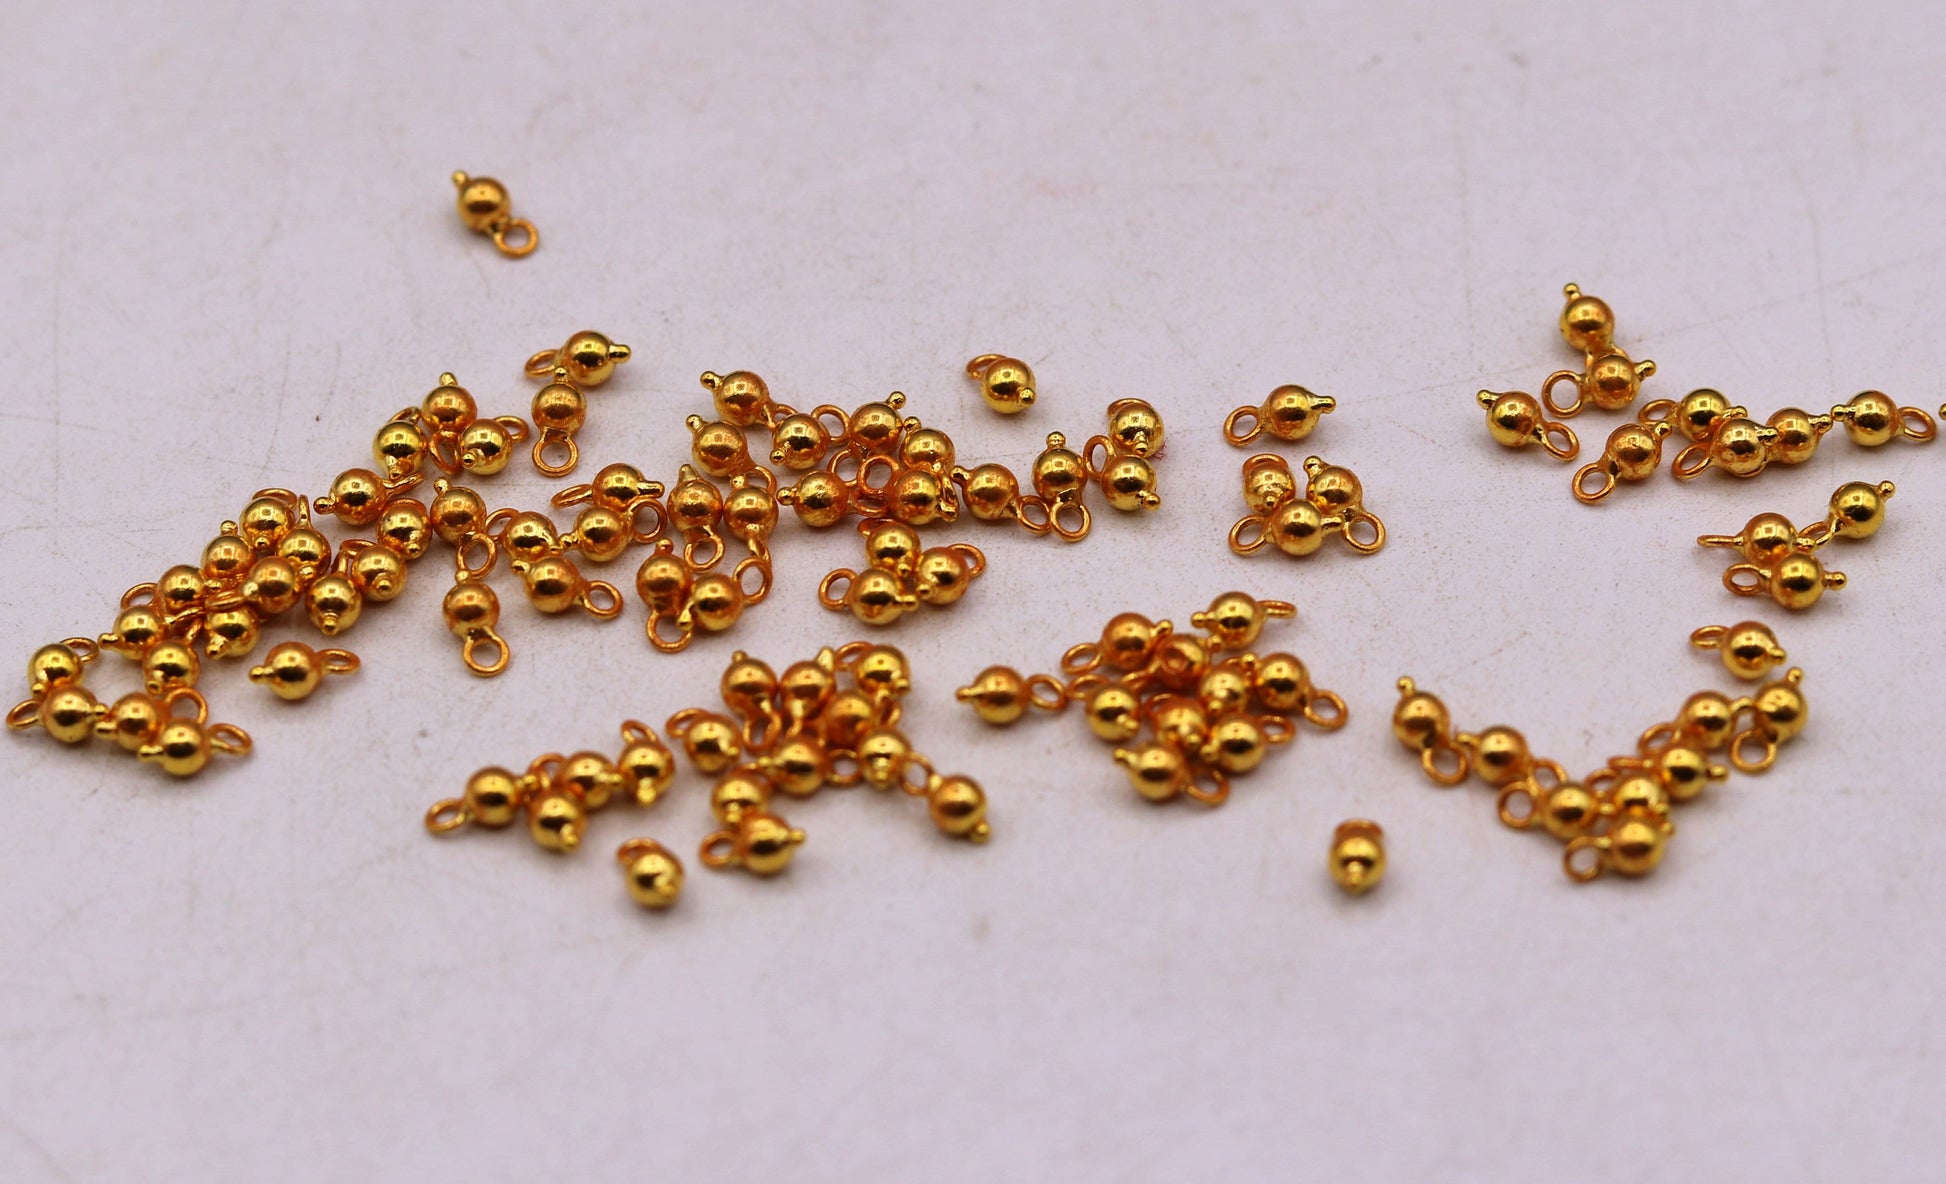 loose beads 20 pieces 22kt gold handmade Vintage antique design custom jewelry findings, hangings bells,loose beads, excellent jewelry BD025 - TRIBAL ORNAMENTS